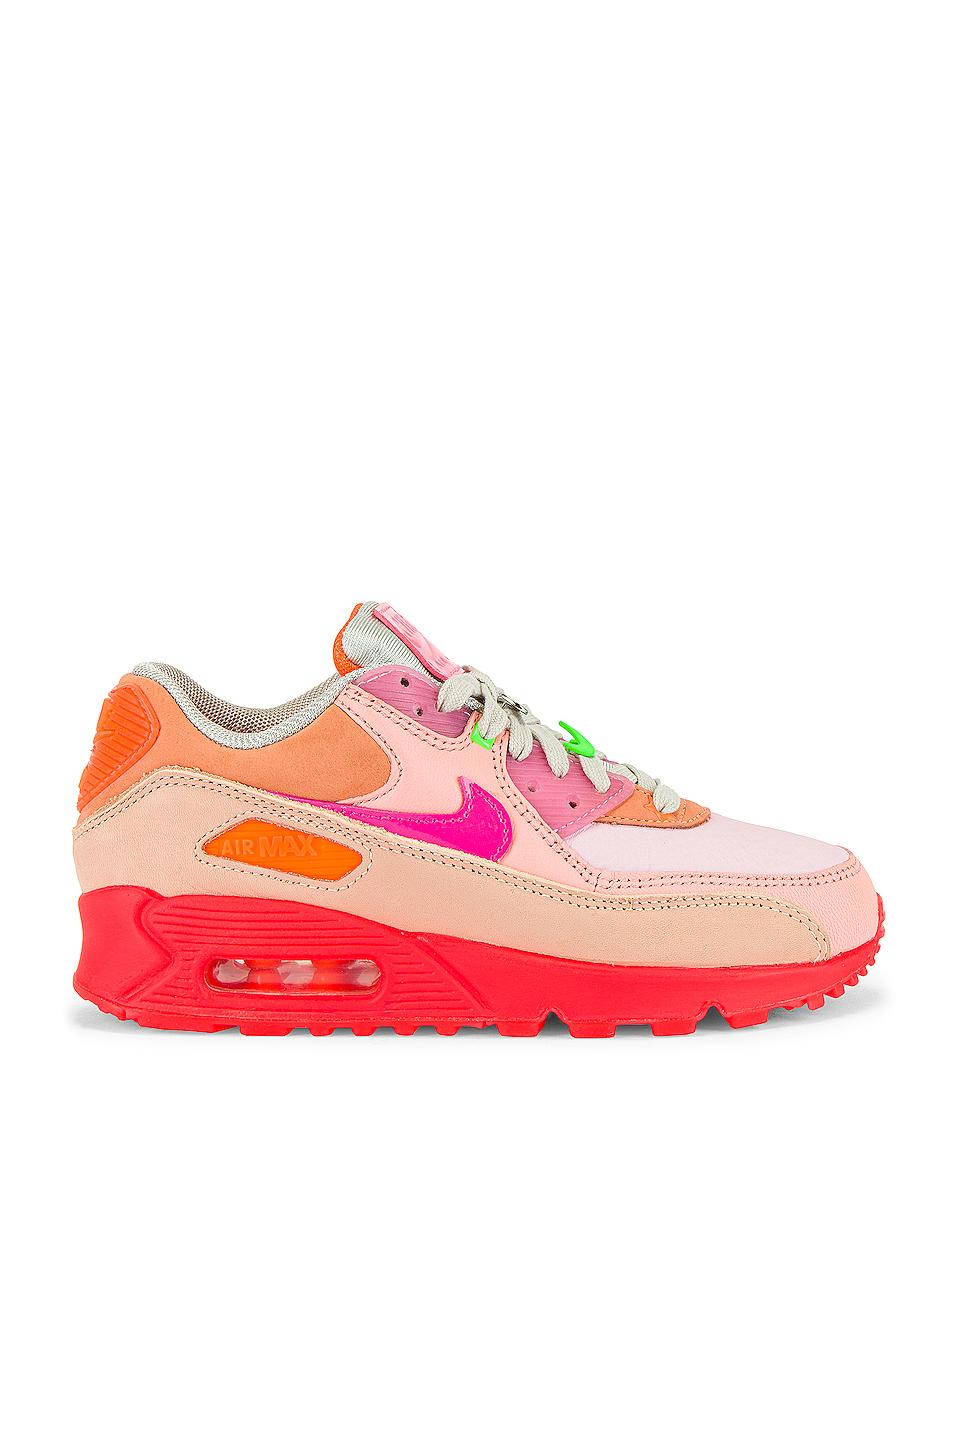 Emular dolor de estómago Encogimiento Nike Pink And Orange Air Max 90 Sneakers With Layered Design And Integrated  Air Technology. | Lyst